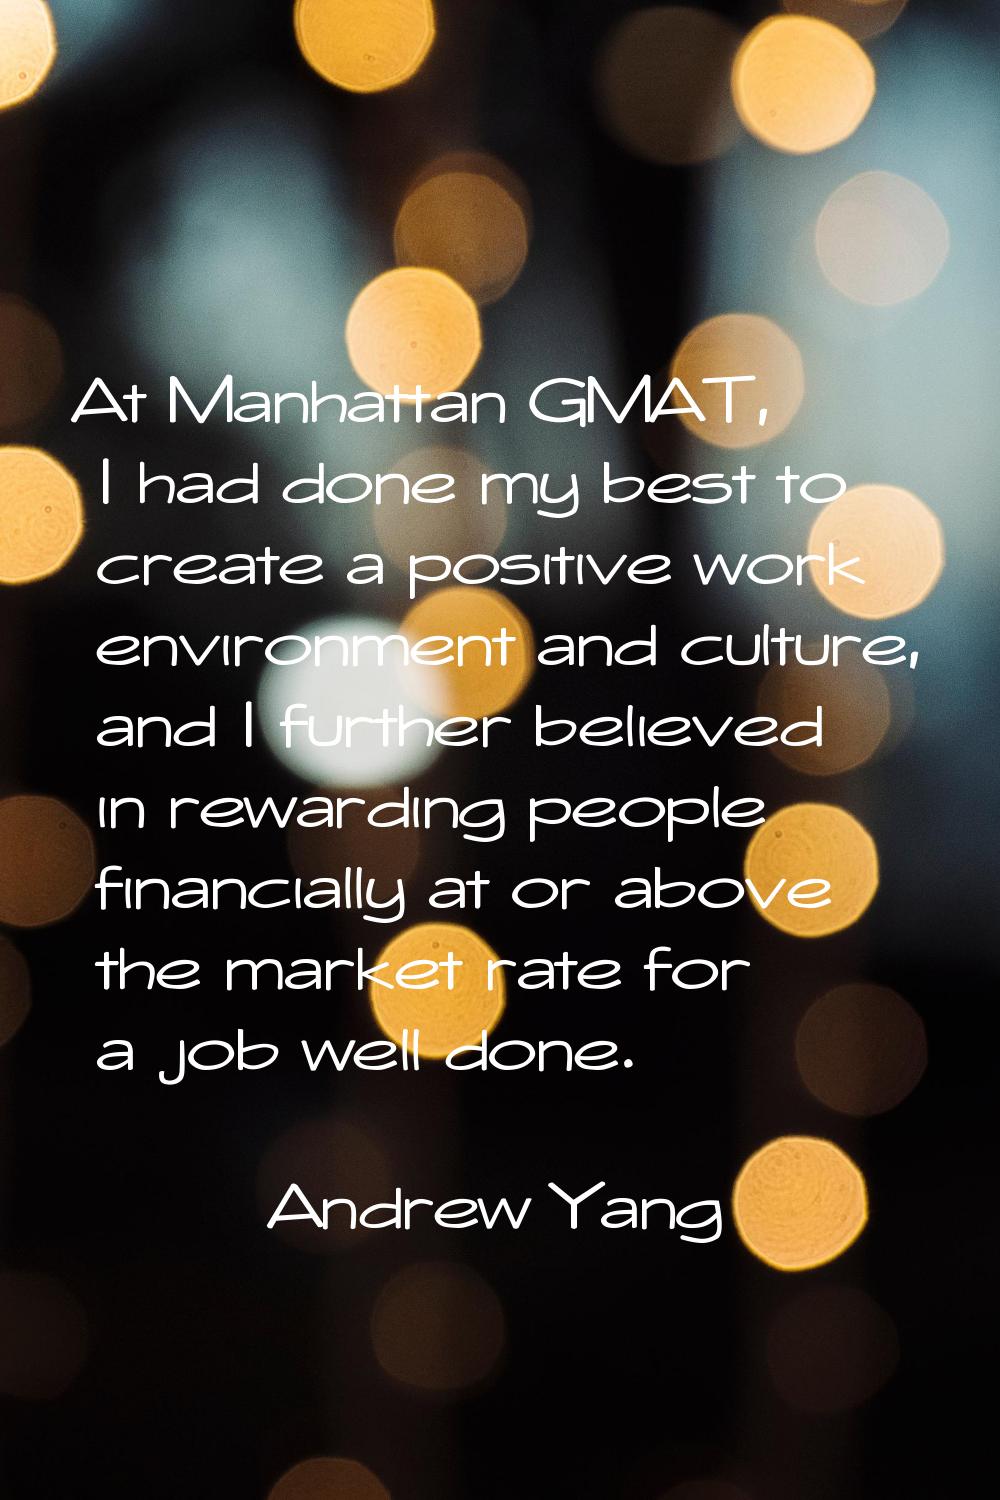 At Manhattan GMAT, I had done my best to create a positive work environment and culture, and I furt